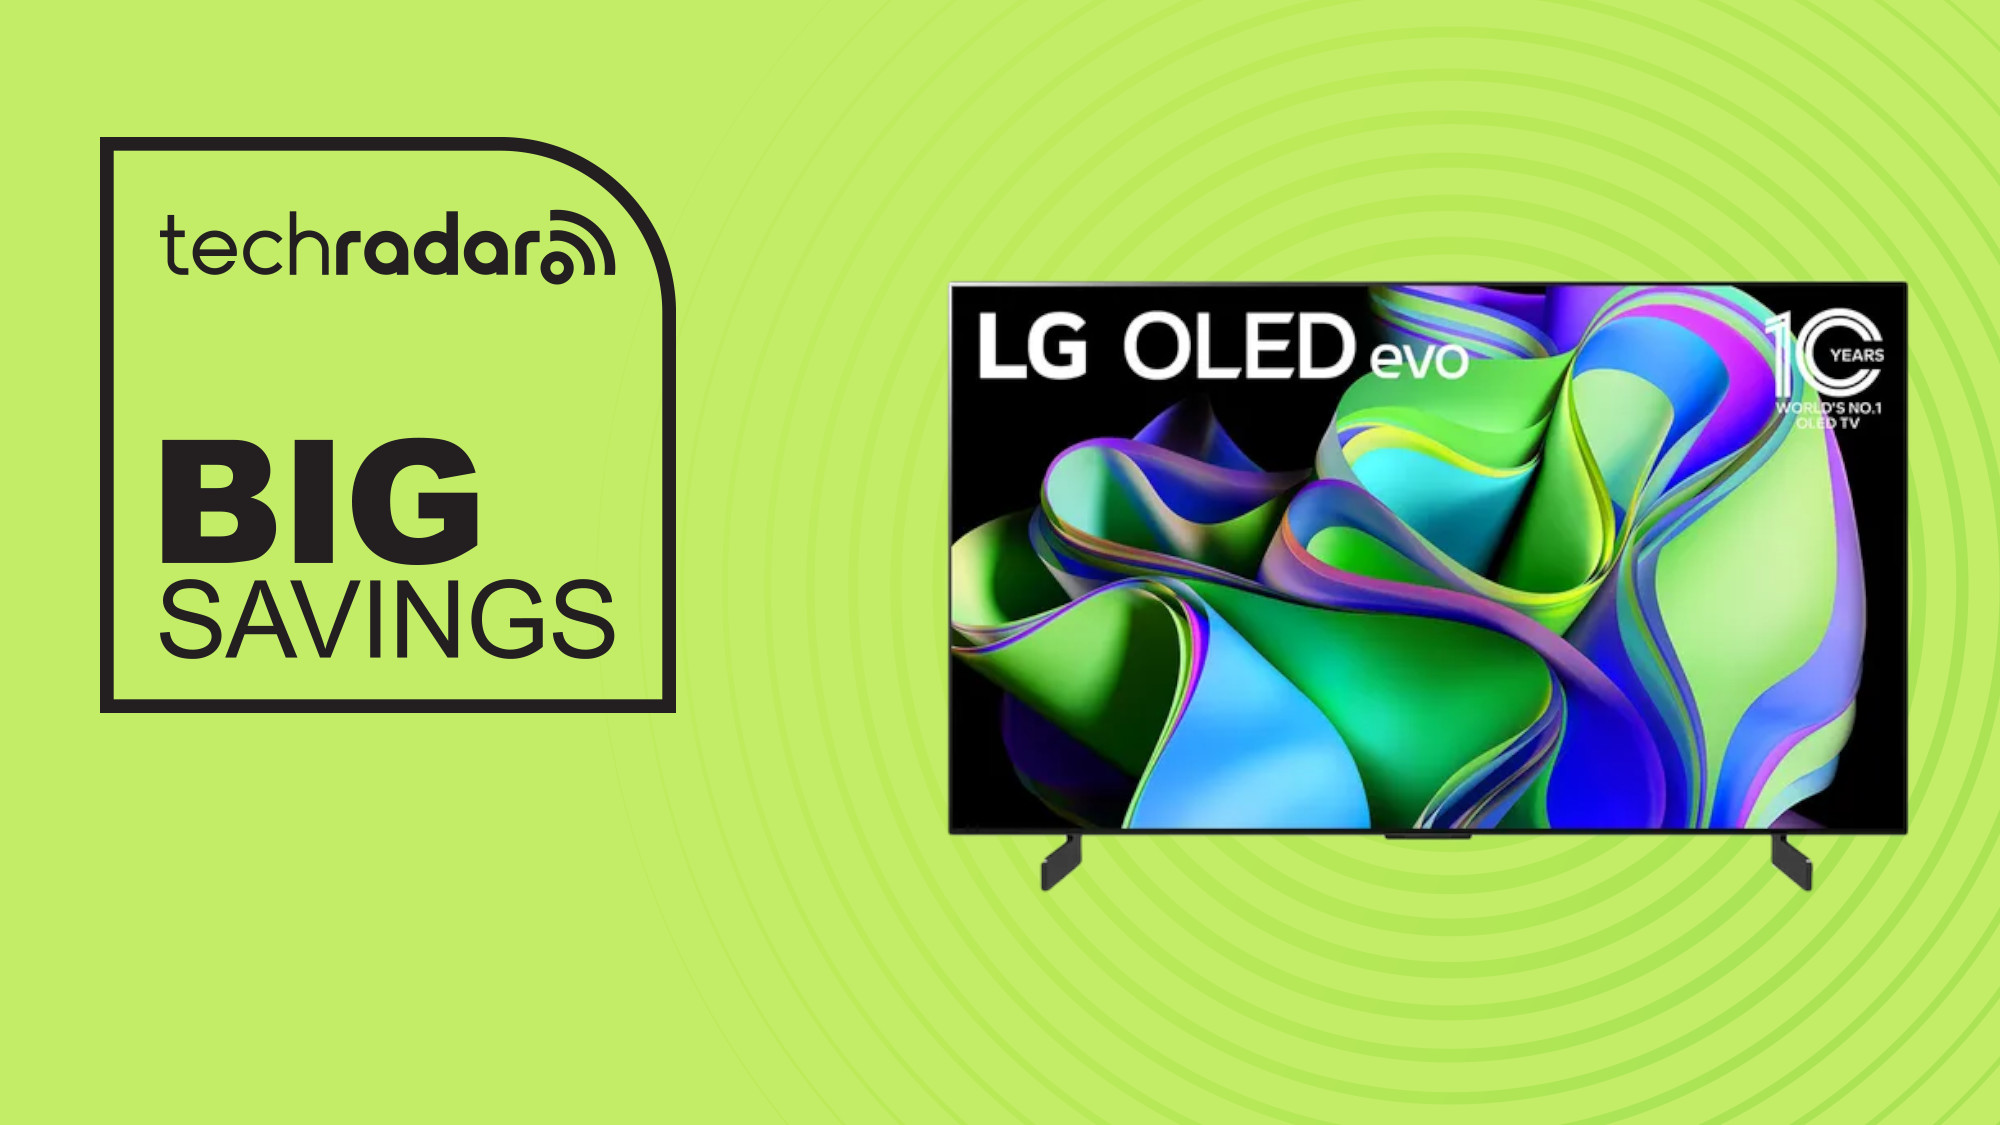 Best Buy launches massive March Madness TV sale - up to $900 off Samsung, LG and TLC